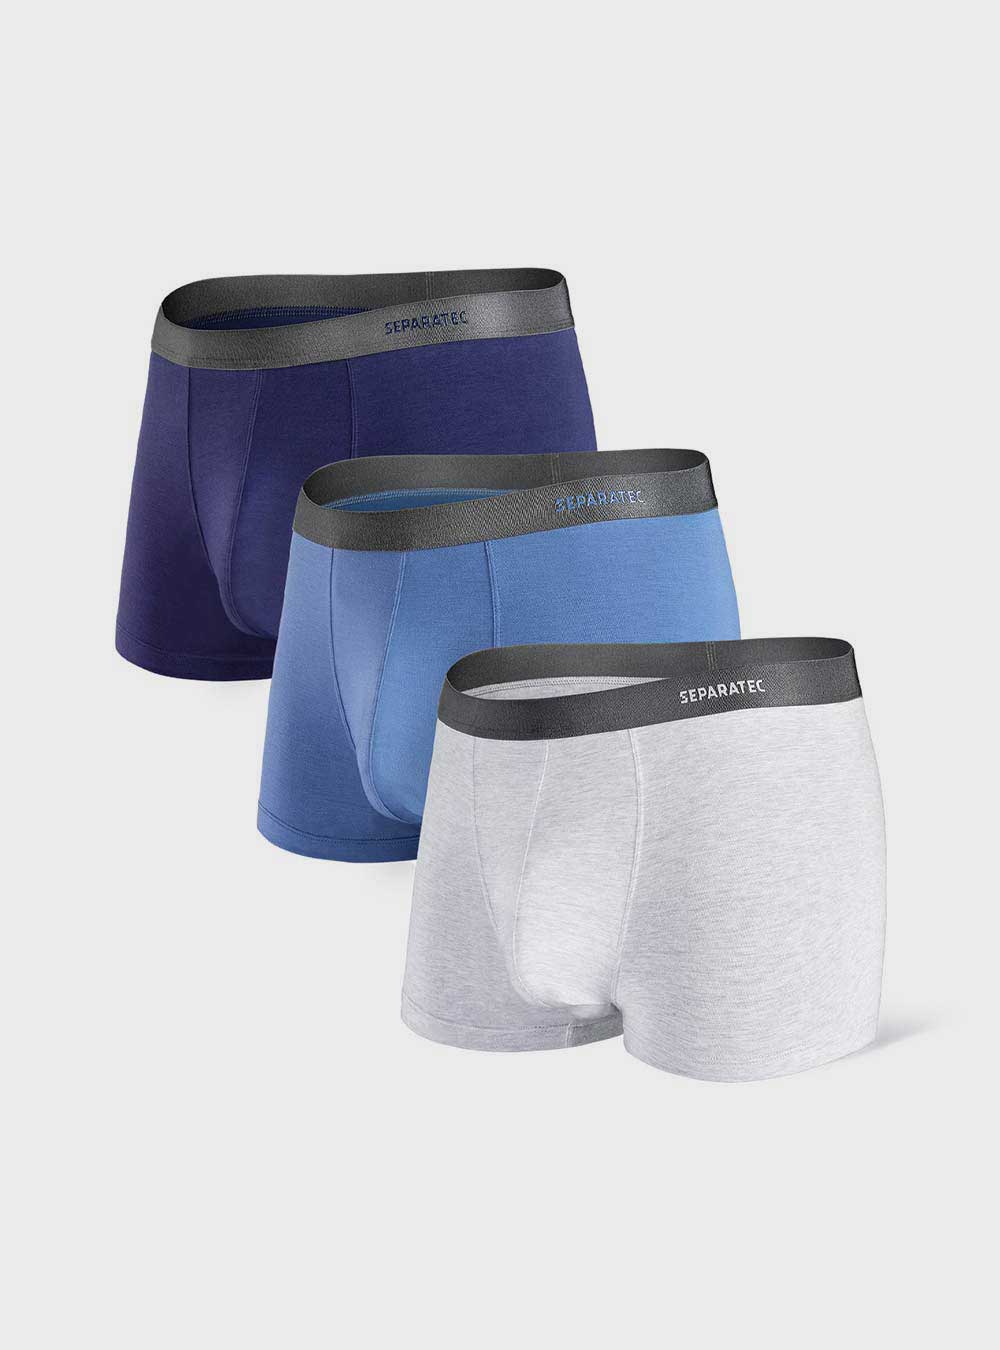 Separatec Basic Bamboo Rayon Comfortable Dual Pouch Men's Trunks